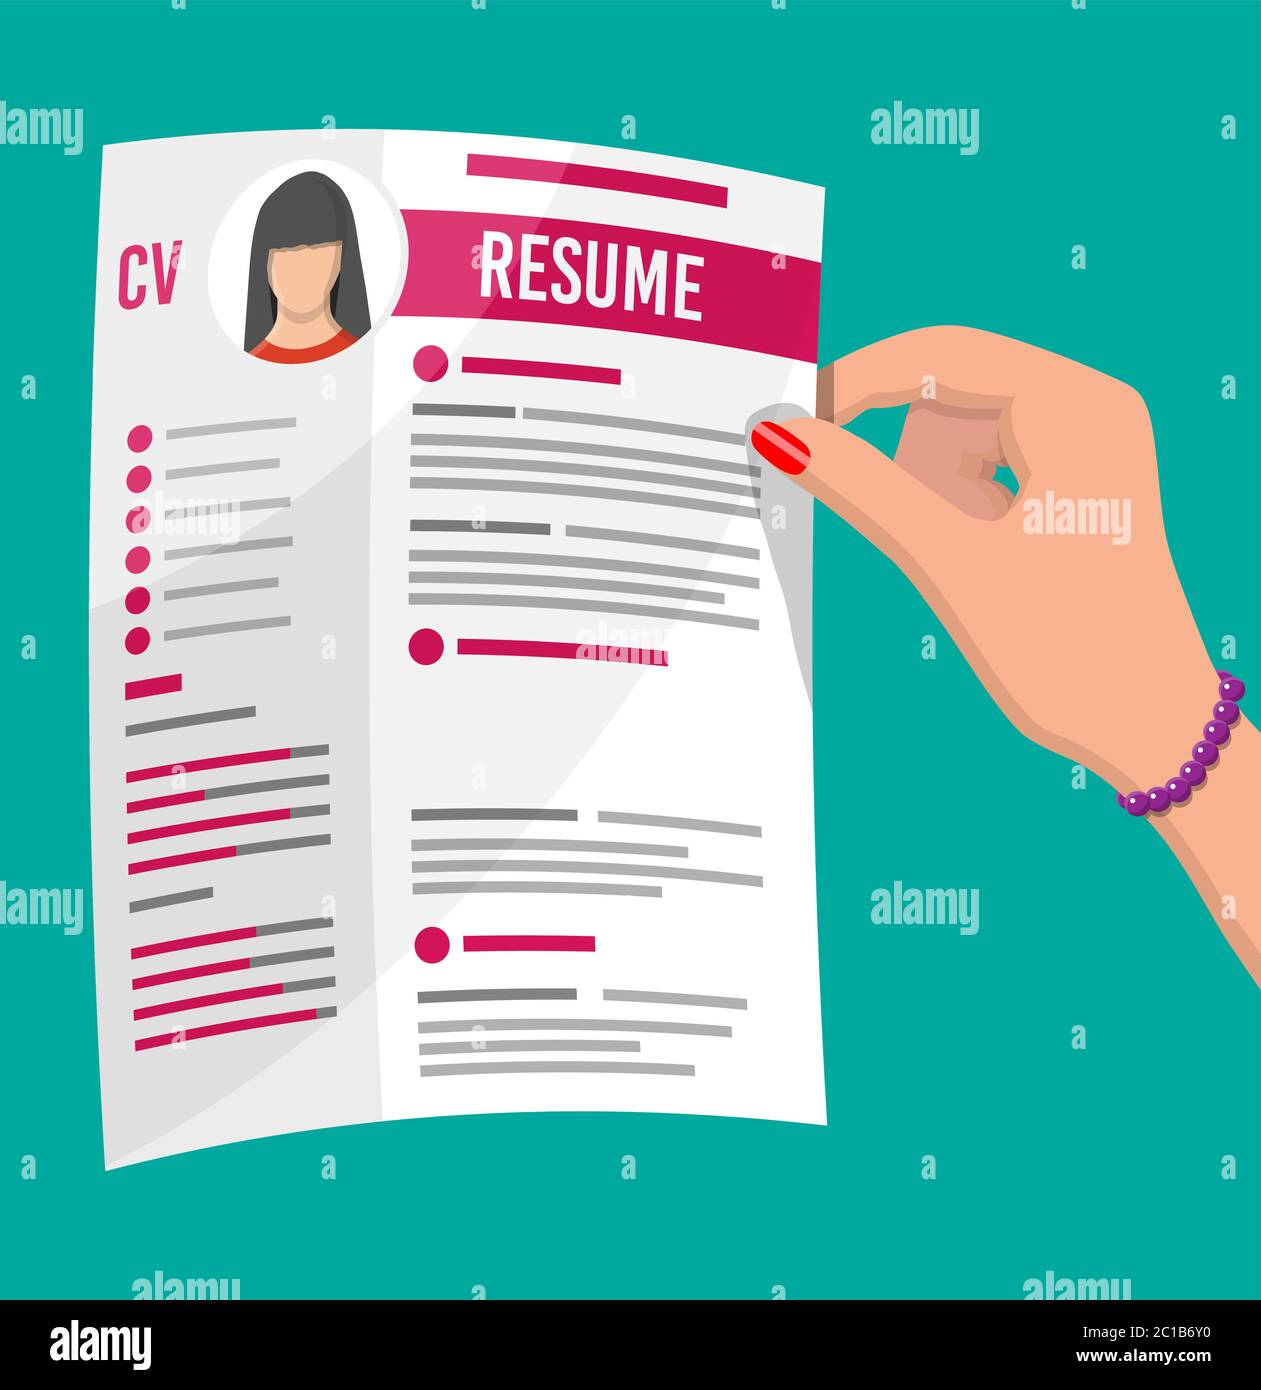 Hand Holding Job Application Cv Papers Resume Job Interview Human Resources Management Concept Searching Professional Staff Work Found Right Resume Vector Illustration In Flat Style Stock Vector Image Art Alamy